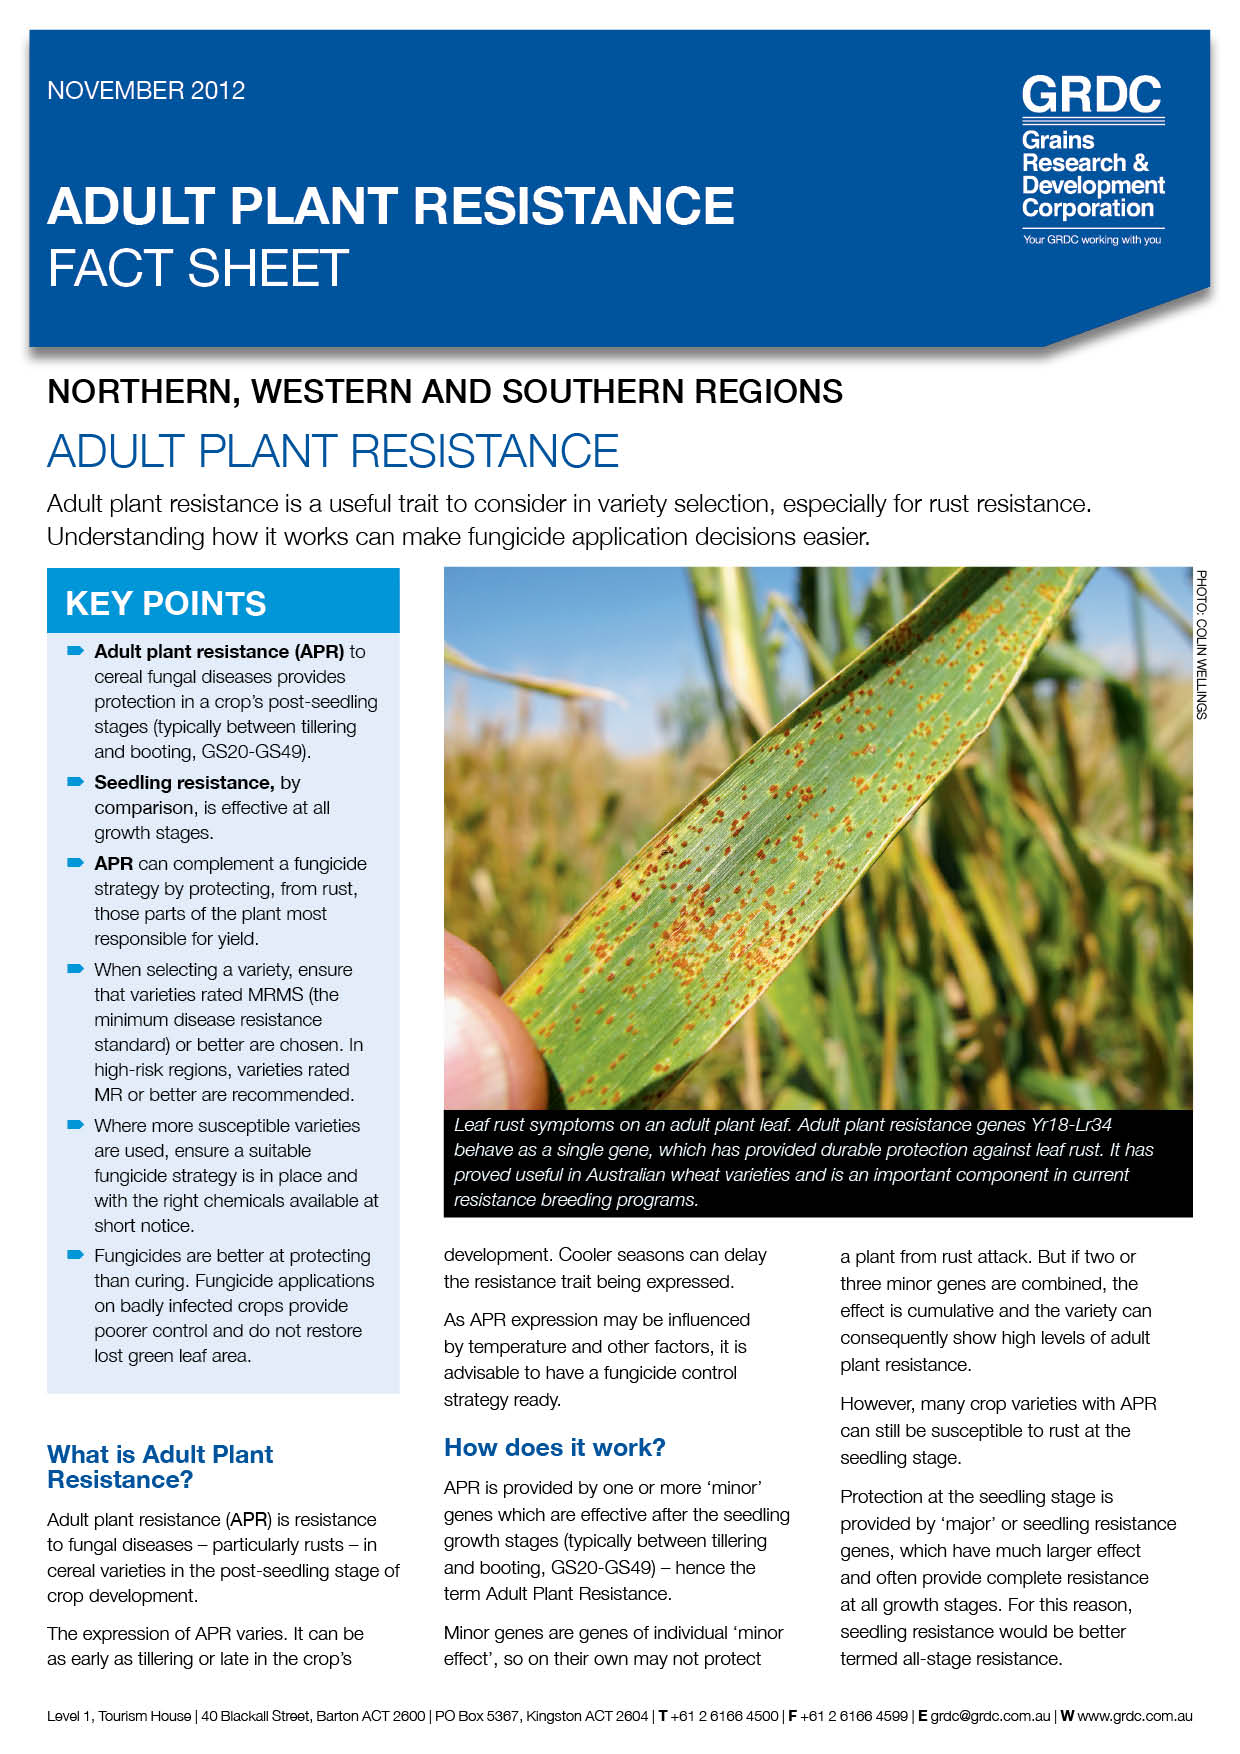 An image of the Adult Plant Resistance Fact Sheet